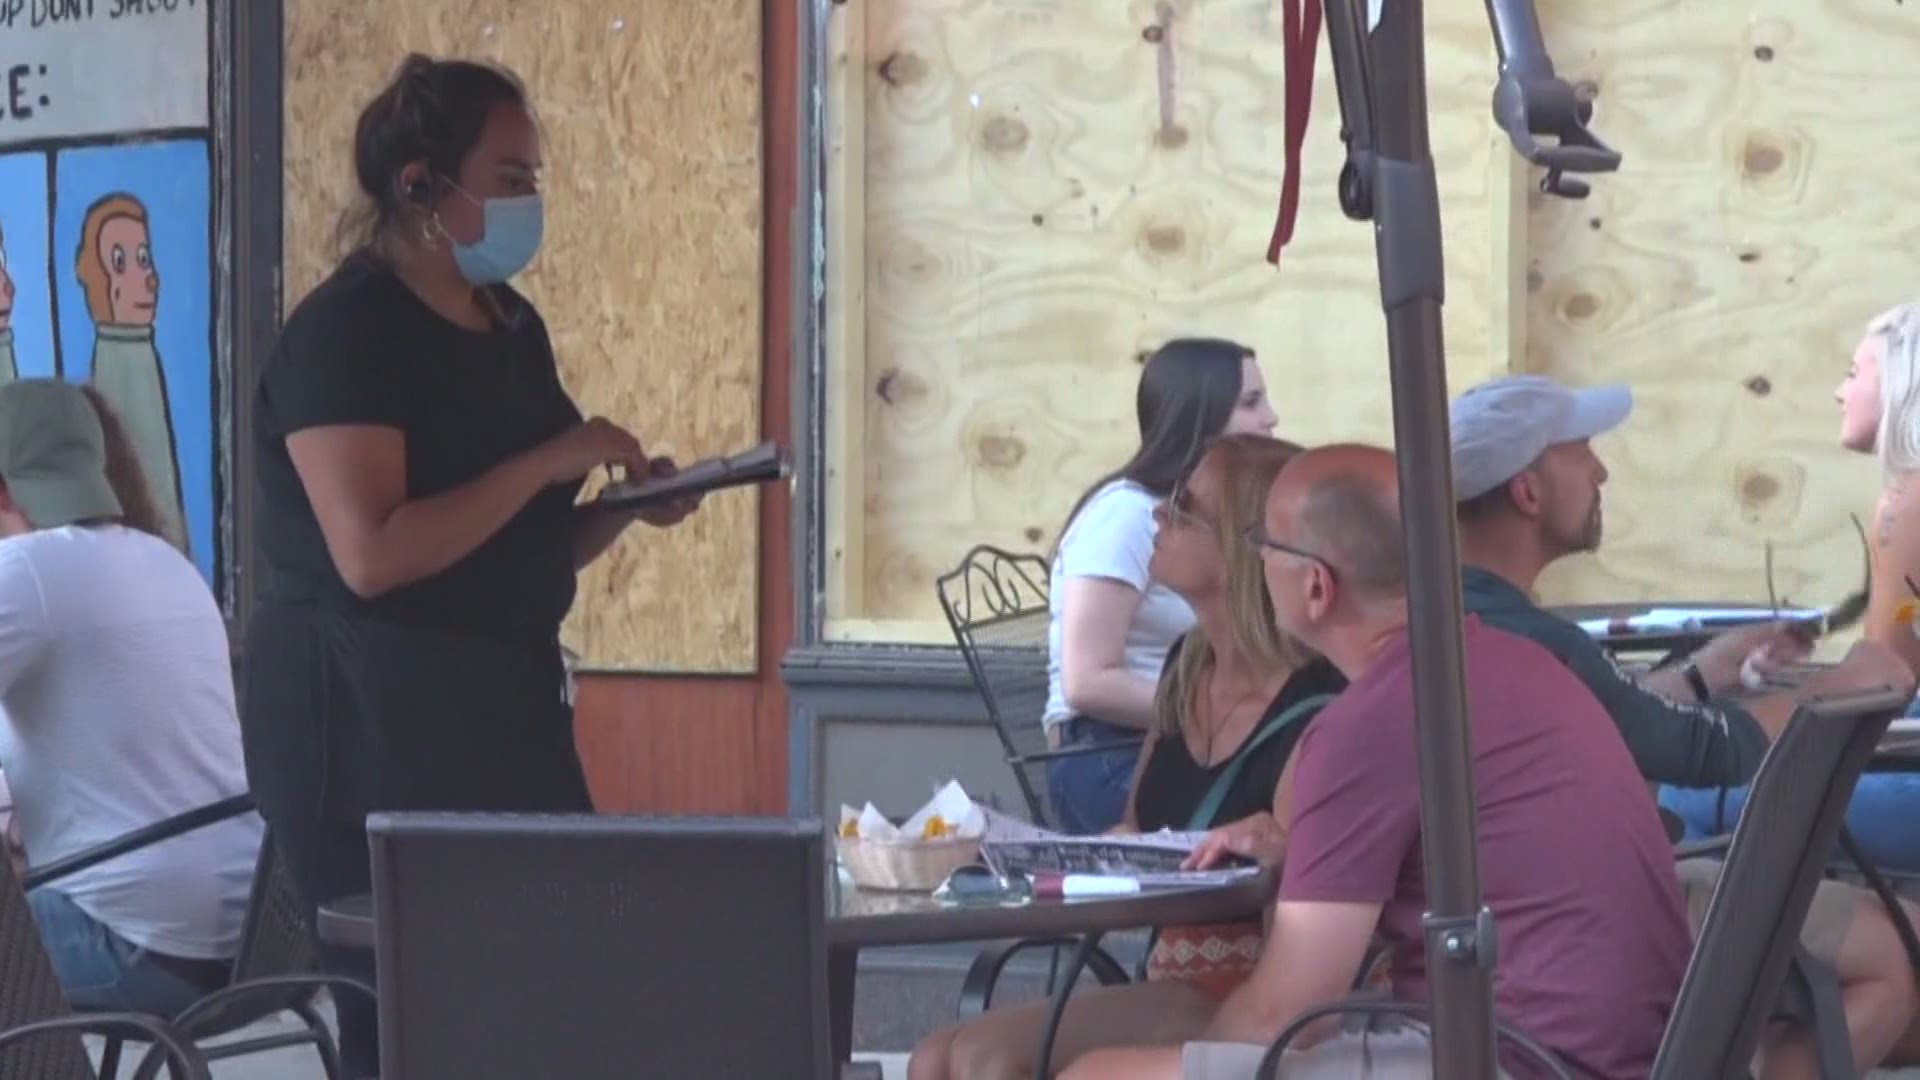 Gov. Gretchen Whitmer signed an executive order Friday requiring people to wear masks when they are in an indoor public space and in crowded outdoor spaces.